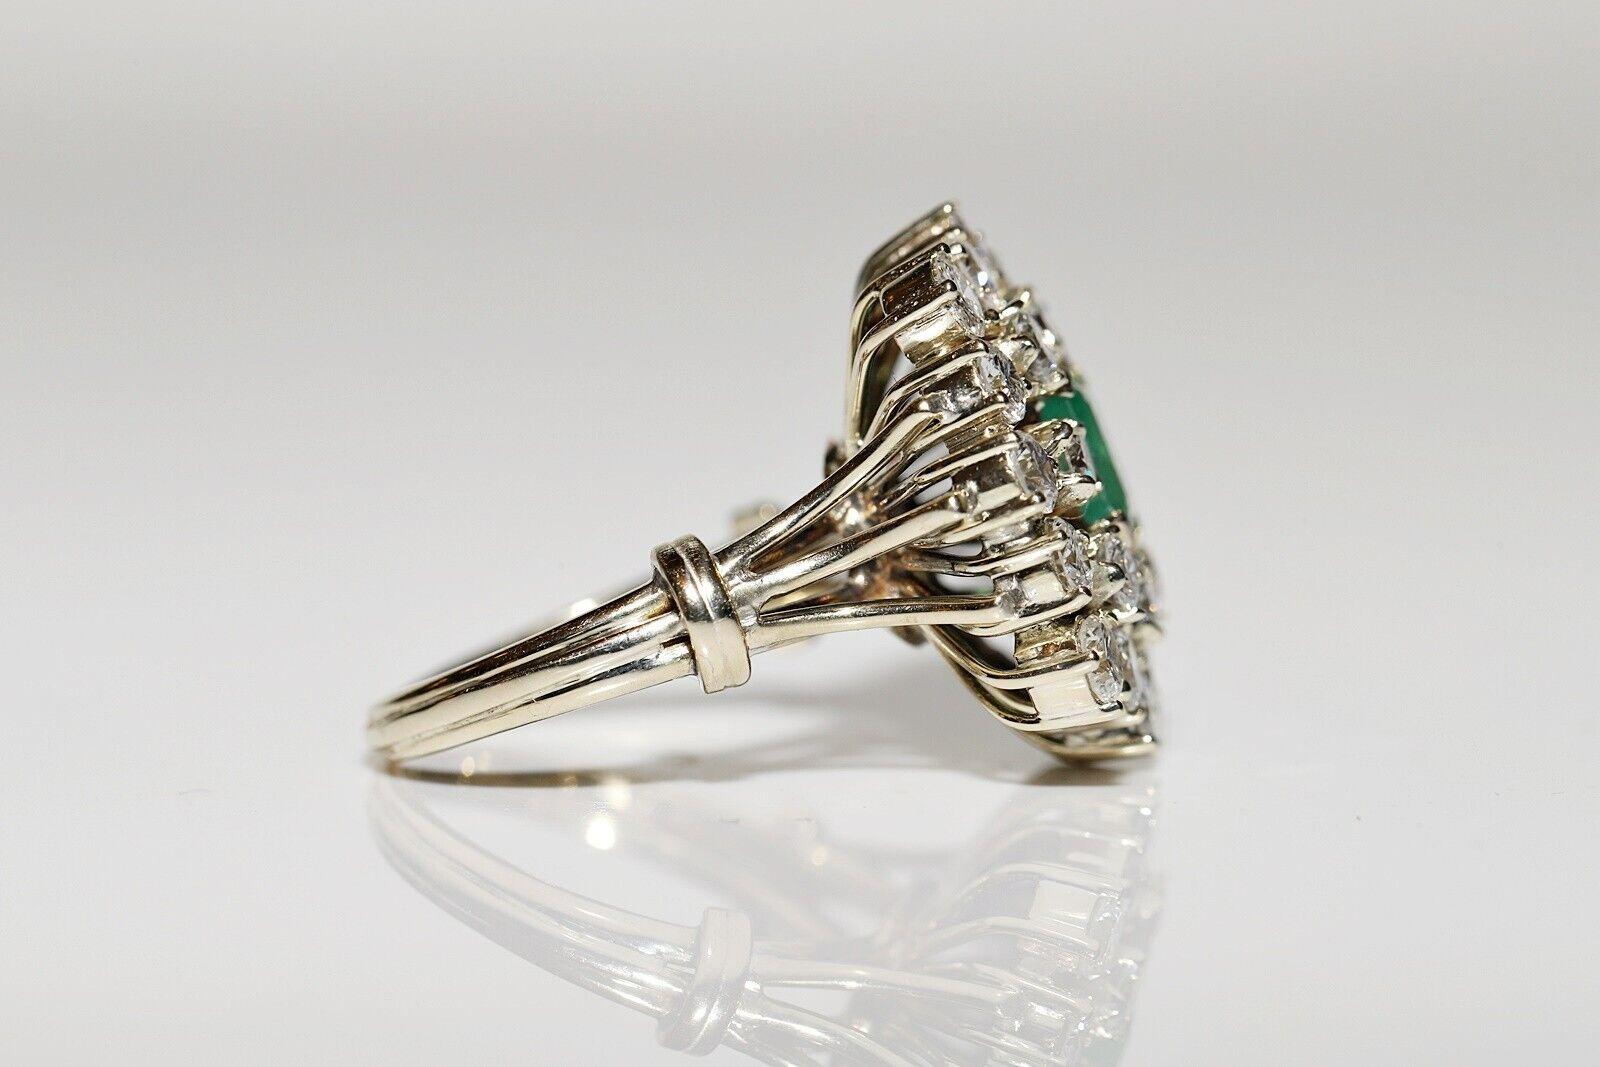 Retro Vintage Circa 1970s 14k Gold Natural Diamond And Emerald Decorated Ring For Sale